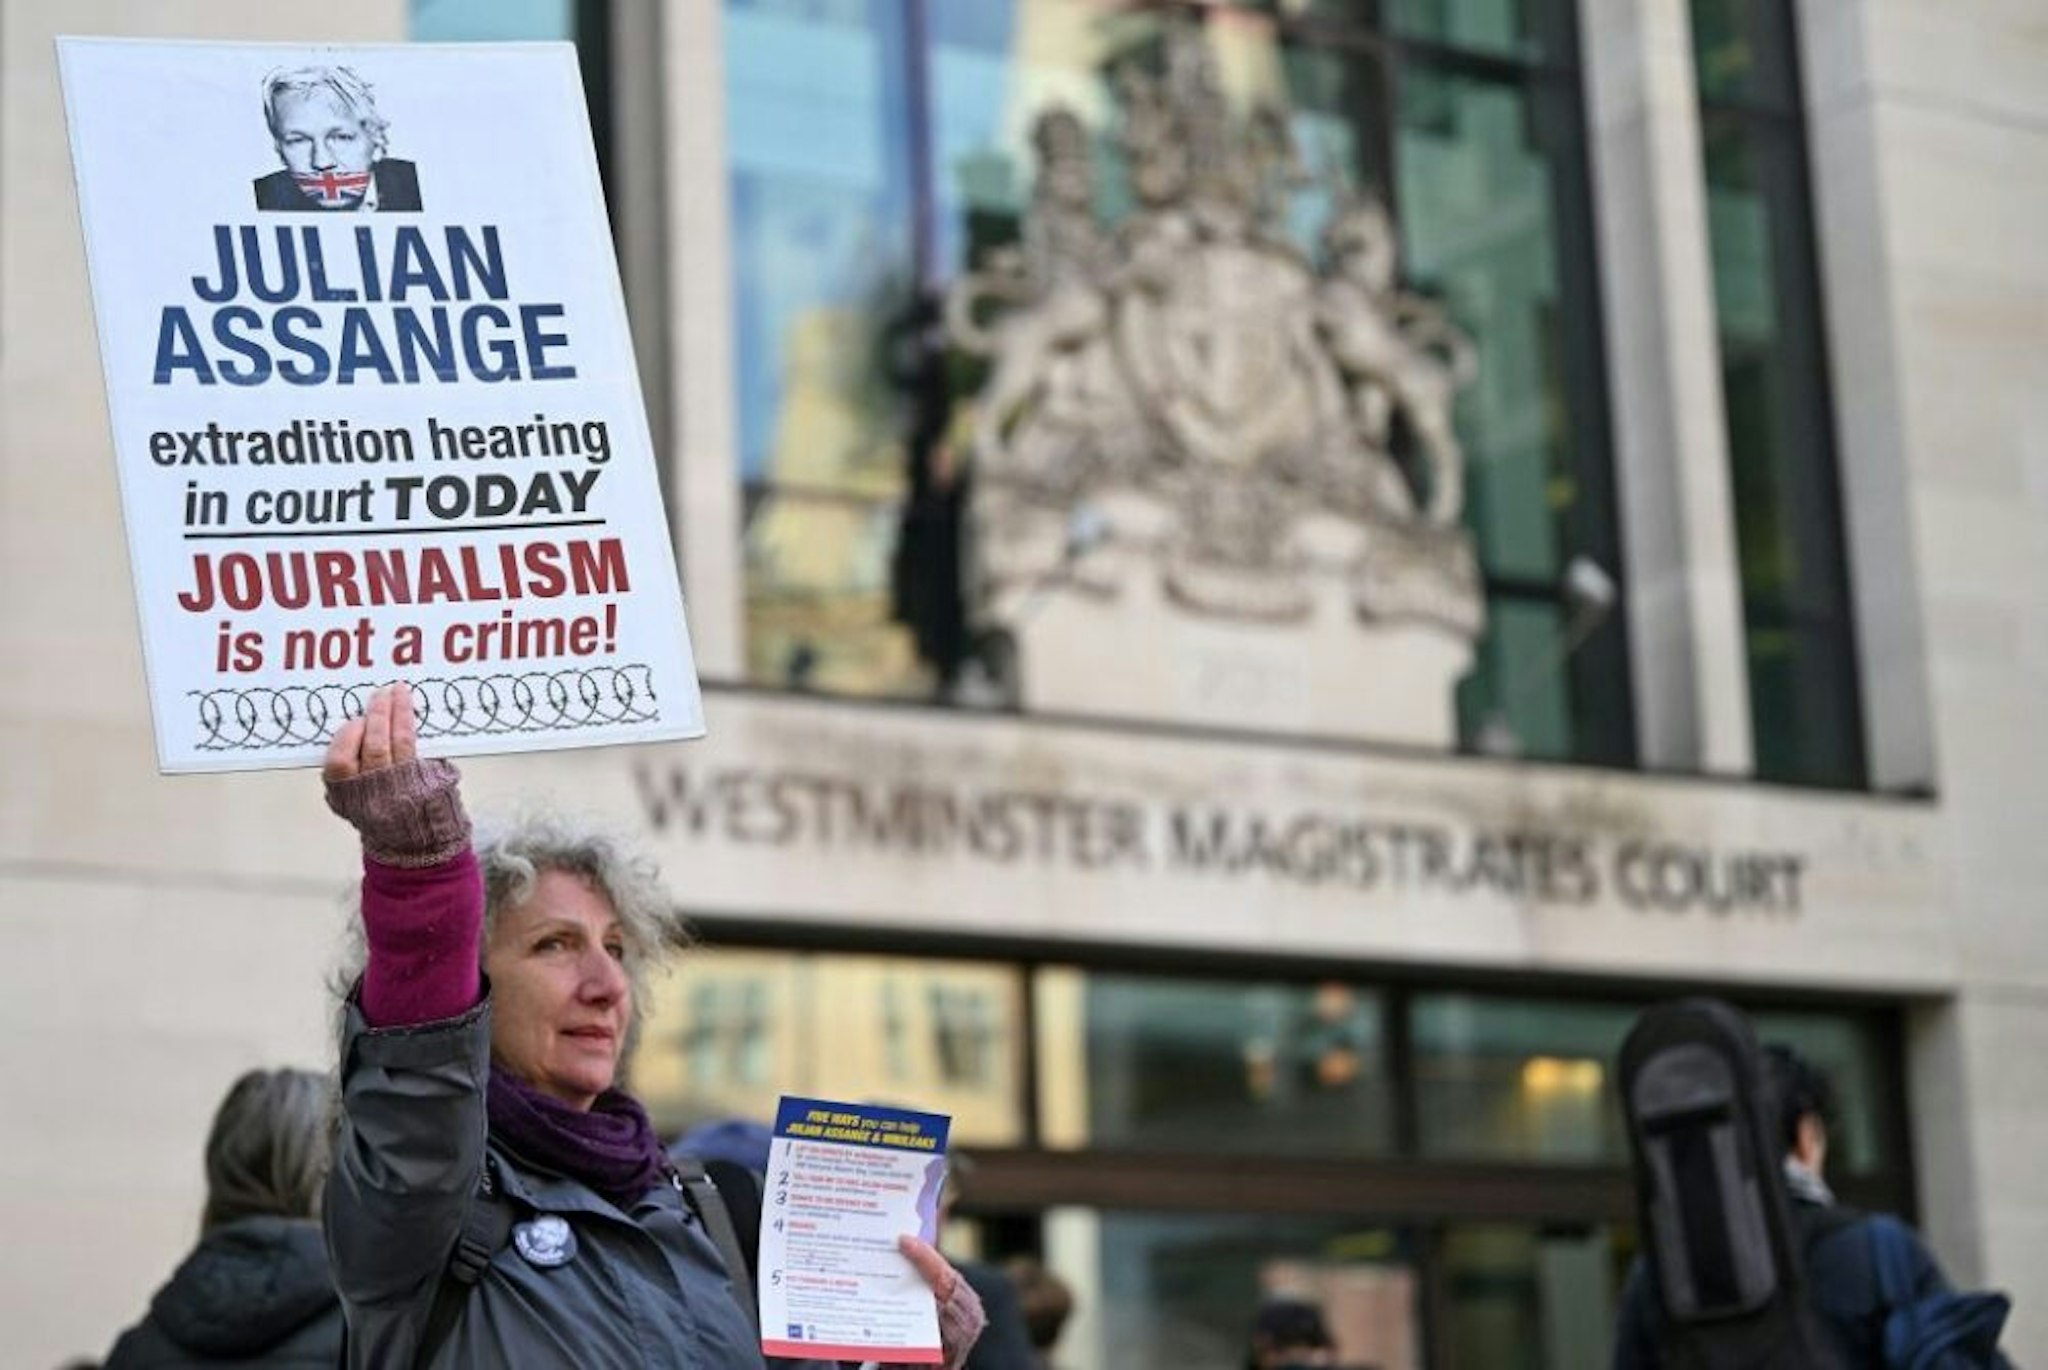 Supporters and activists hold placards outside Westminster Magistrates court in London on April 20, 2022, calling for WikiLeaks founder Julian Assange, who is currently in custody pending an extradition request from the US, to be freed. - Assange is set to at a British court on Wednesday for a hearing relating to Washington's extradition request over hacking charges in a test case of media freedoms in the digital age and the global limits of US justice.